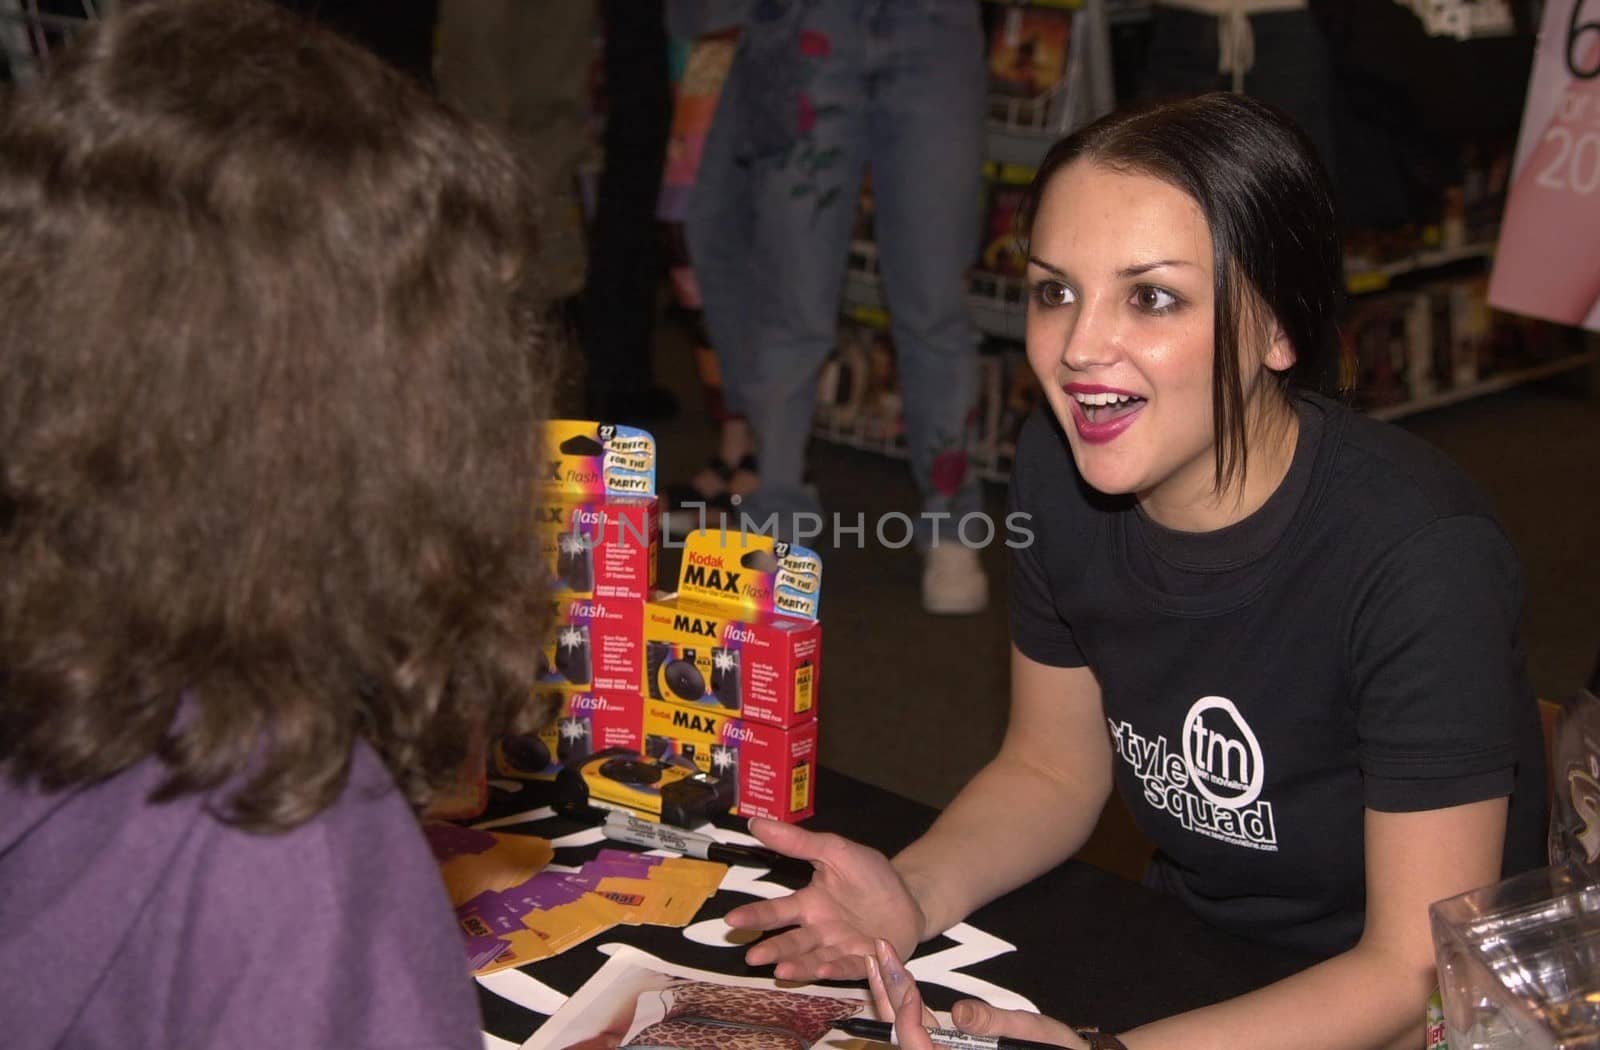 Rachael Leigh Cook Signing by ImageCollect